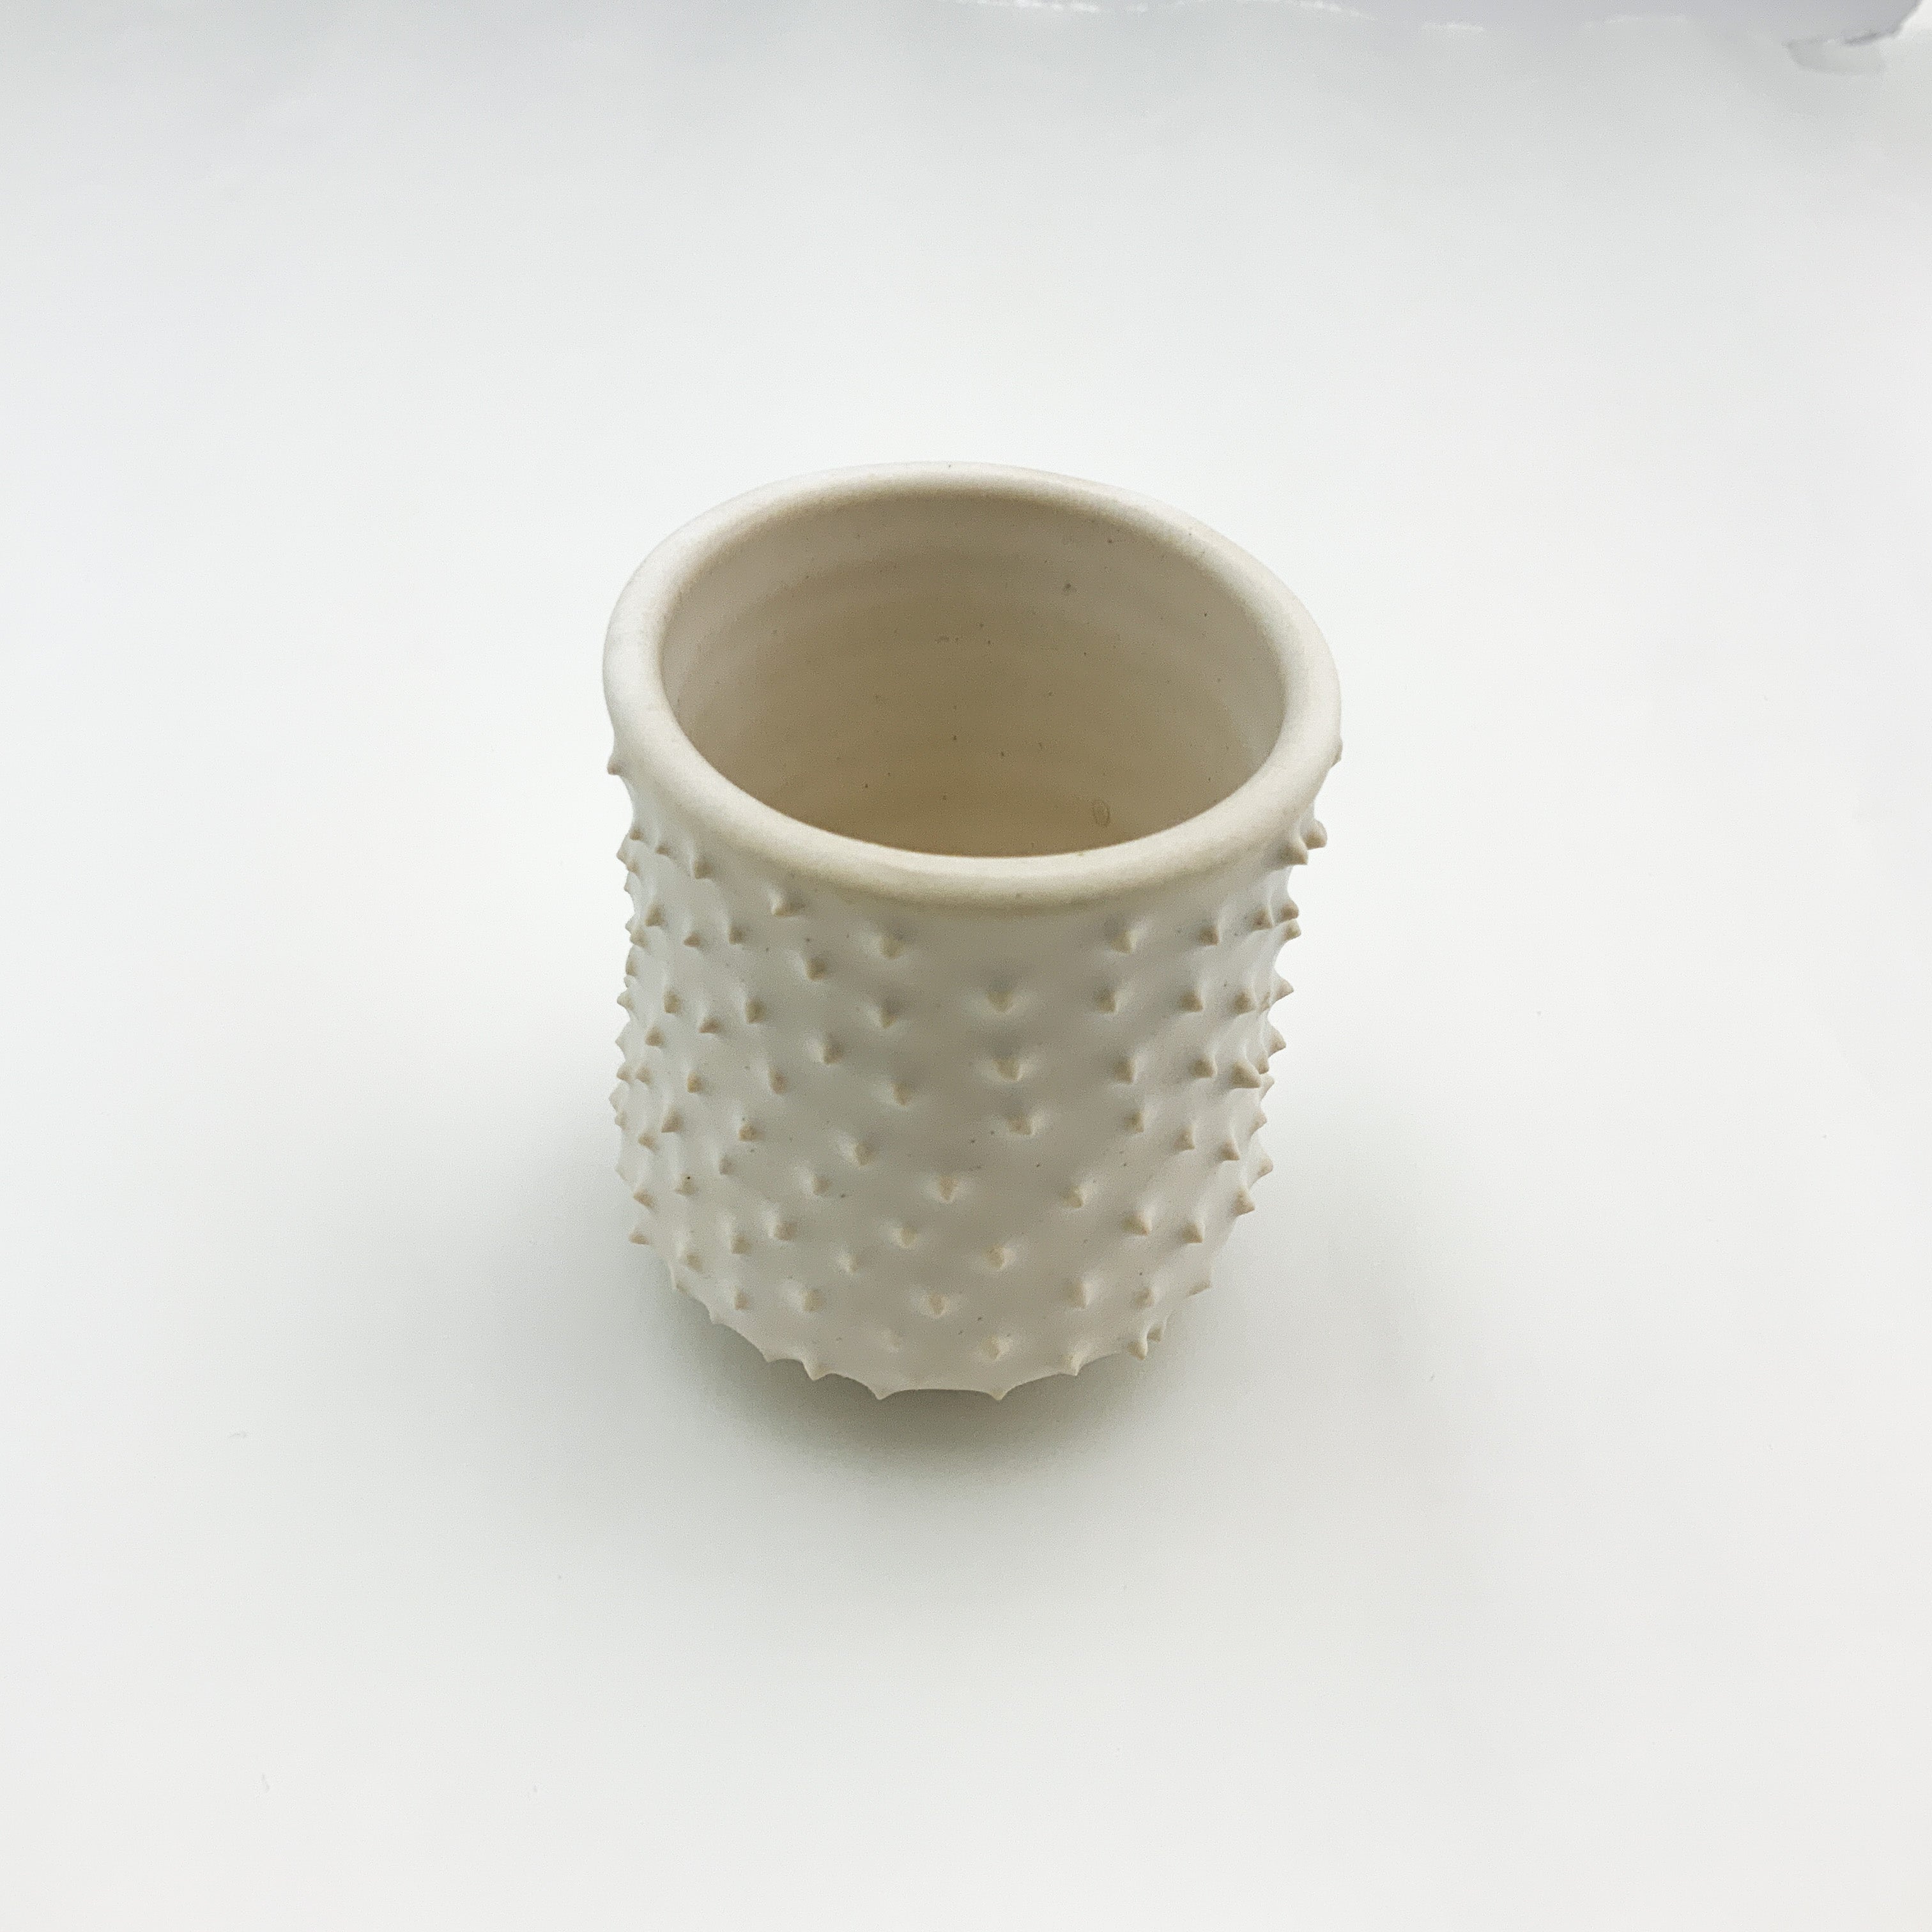 SMALL SPIKED CERAMIC CUP - WHITE